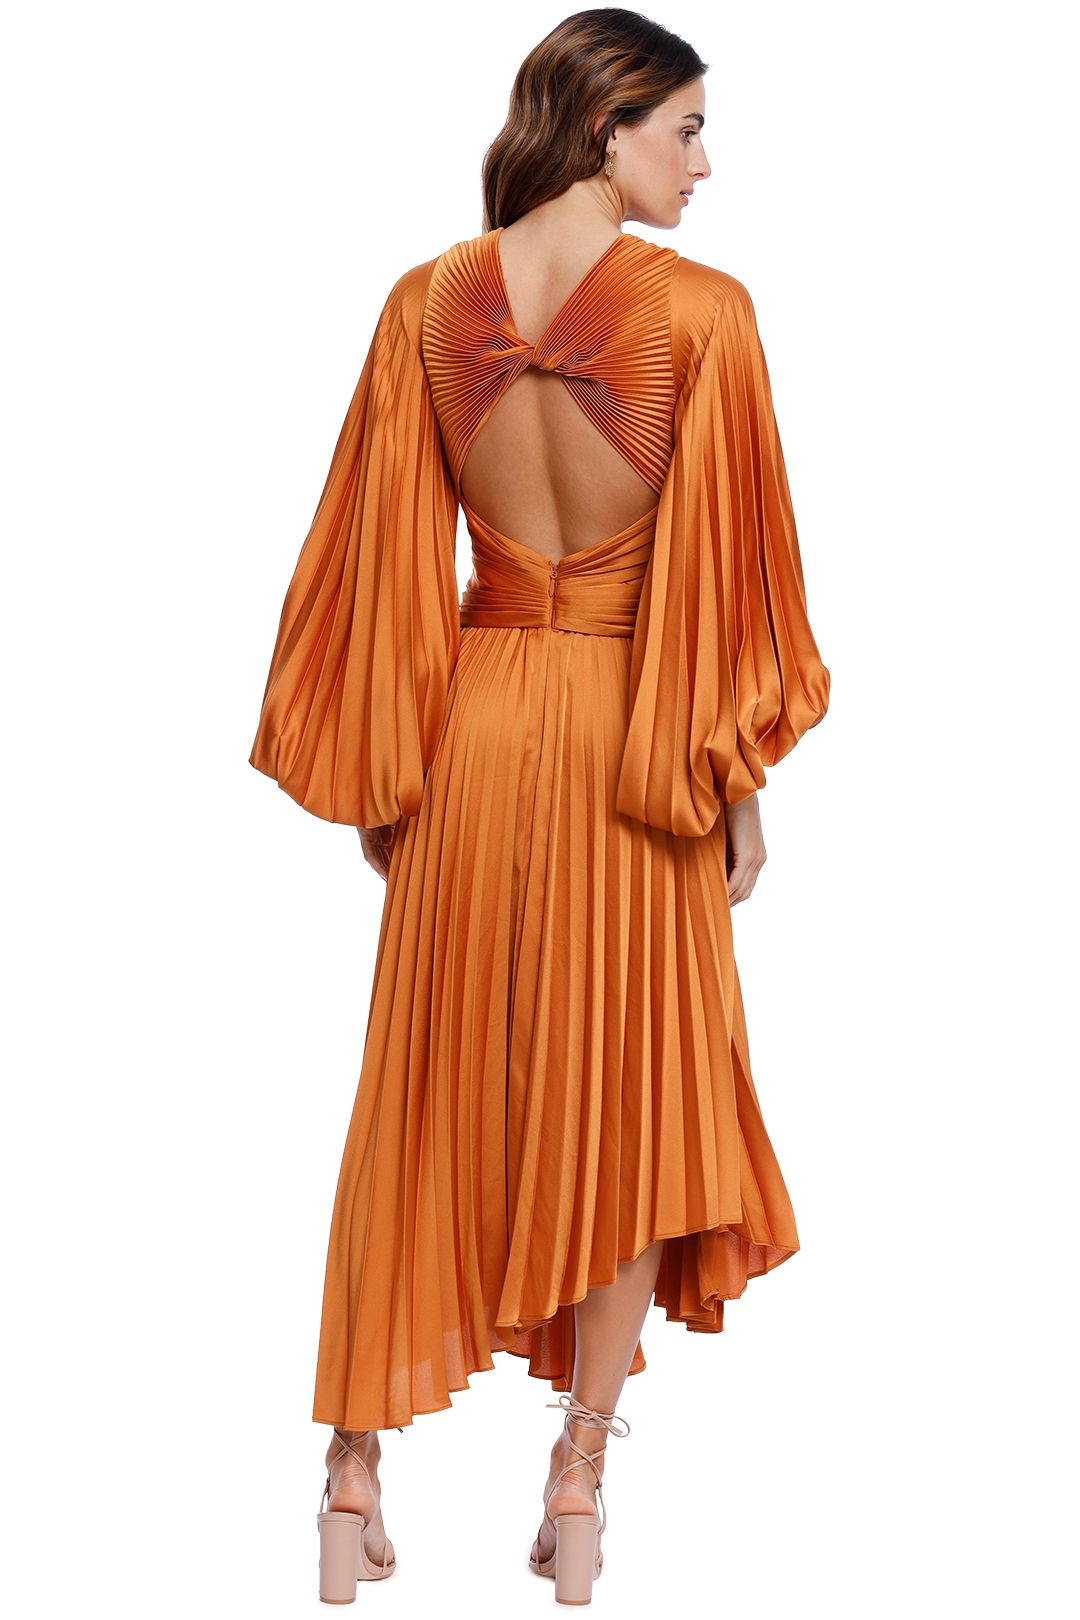 Hire Palms Dress in Turmeric | Acler ...